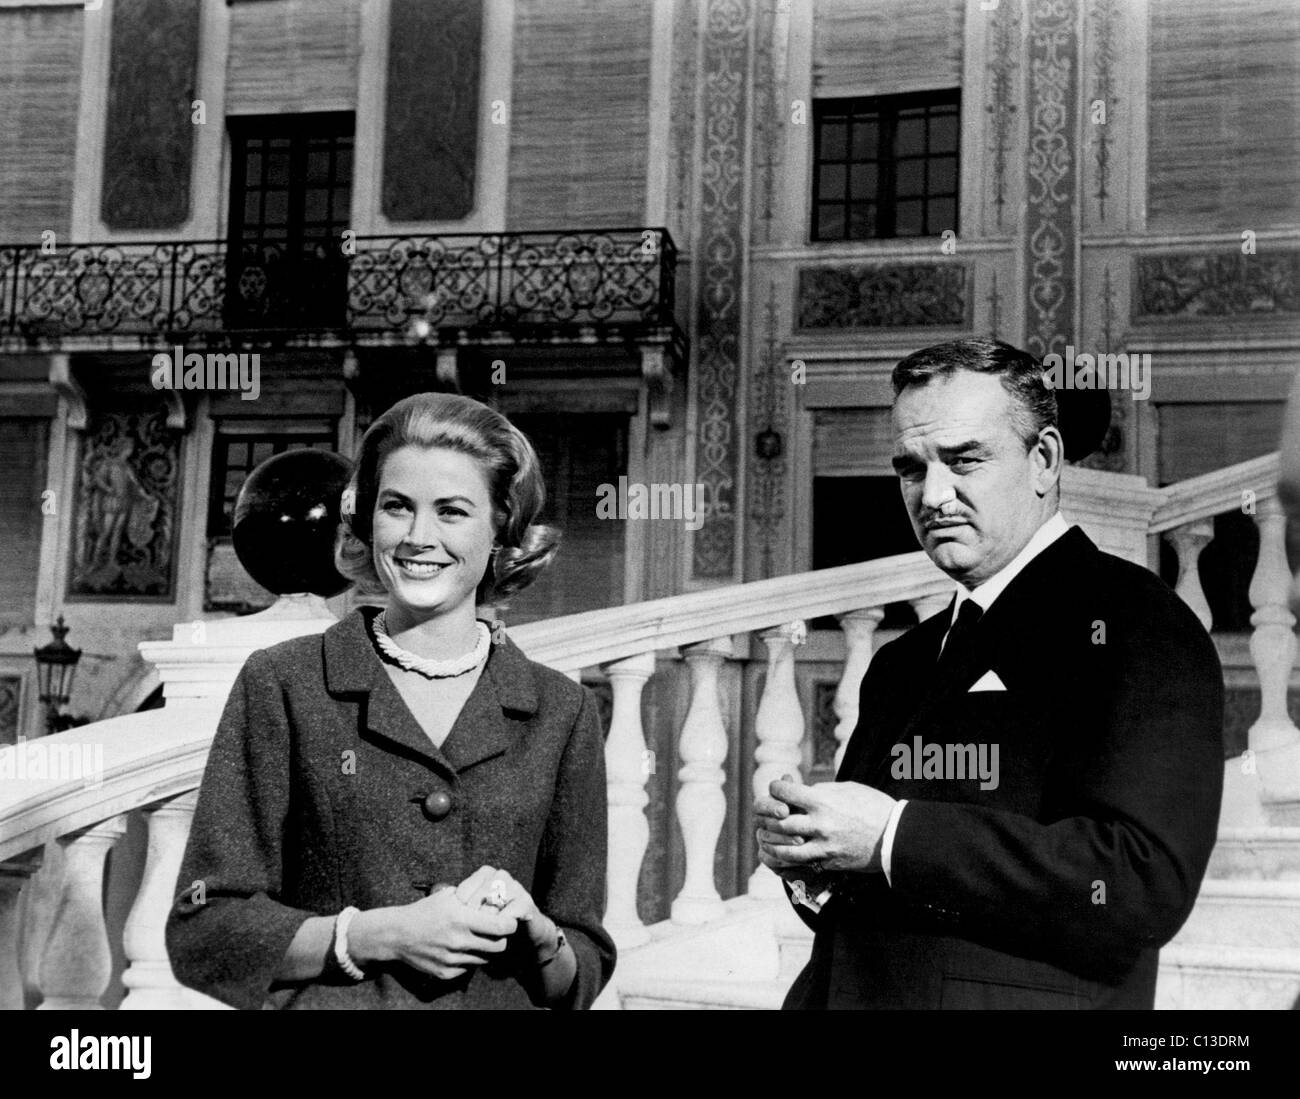 PRINCESS GRACE (aka Grace Kelly) and PRINCE RAINIER offer American TV viewers A LOOK AT MONACO, 1963 Stock Photo